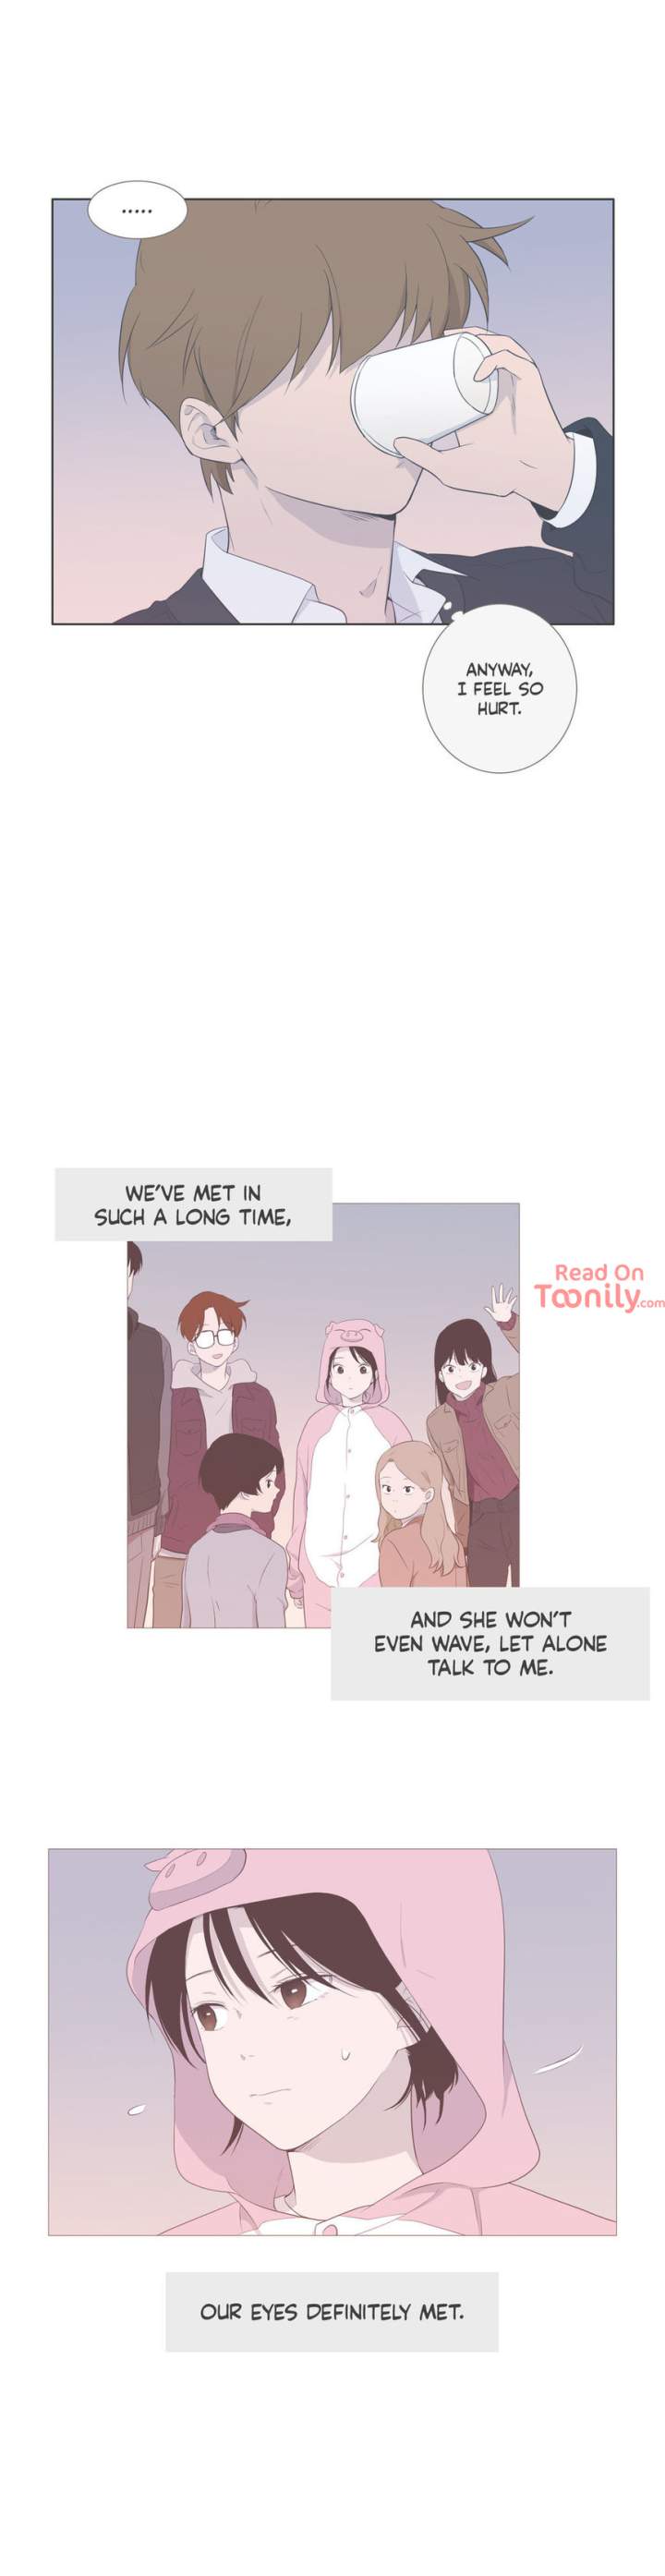 Something About Us - Chapter 61 Page 12